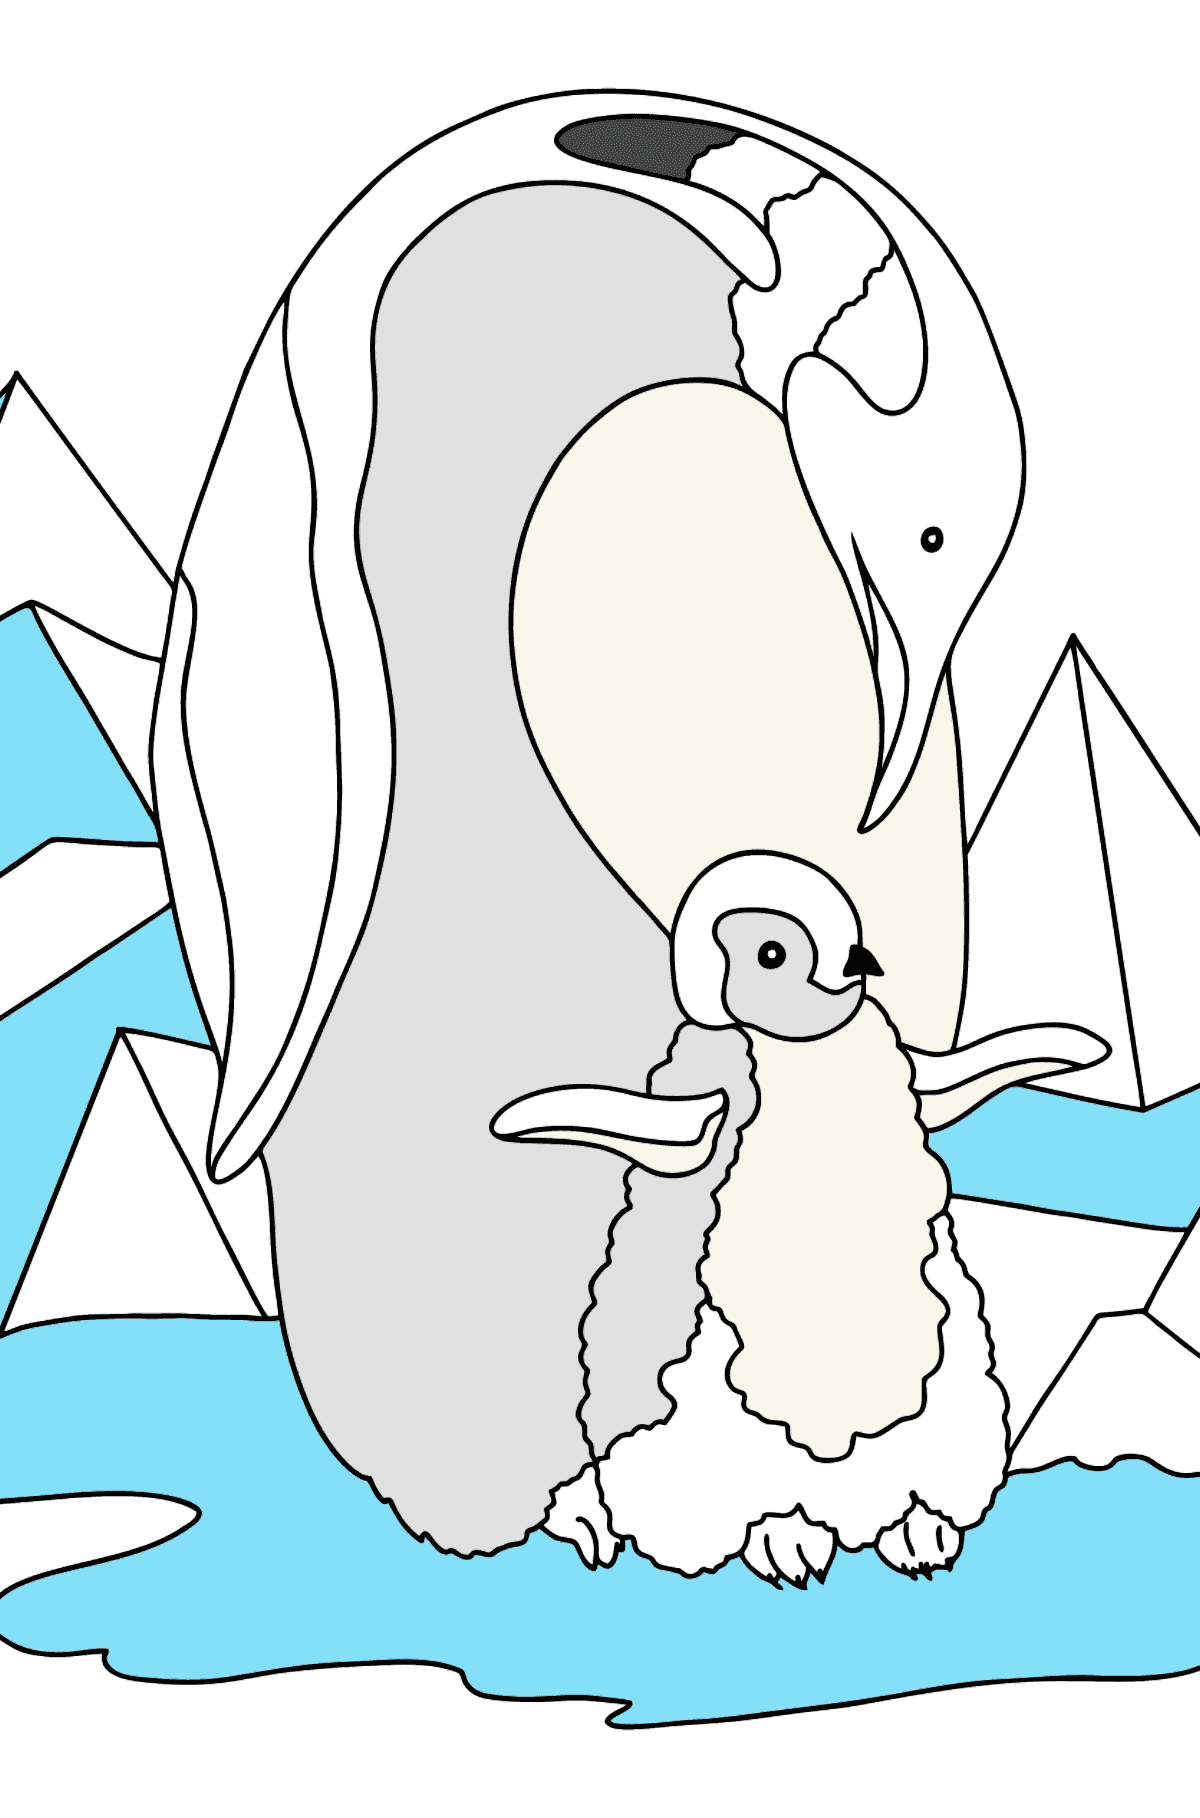 Coloring Page - A Penguin with a Penguin Chick - Coloring Pages for Kids